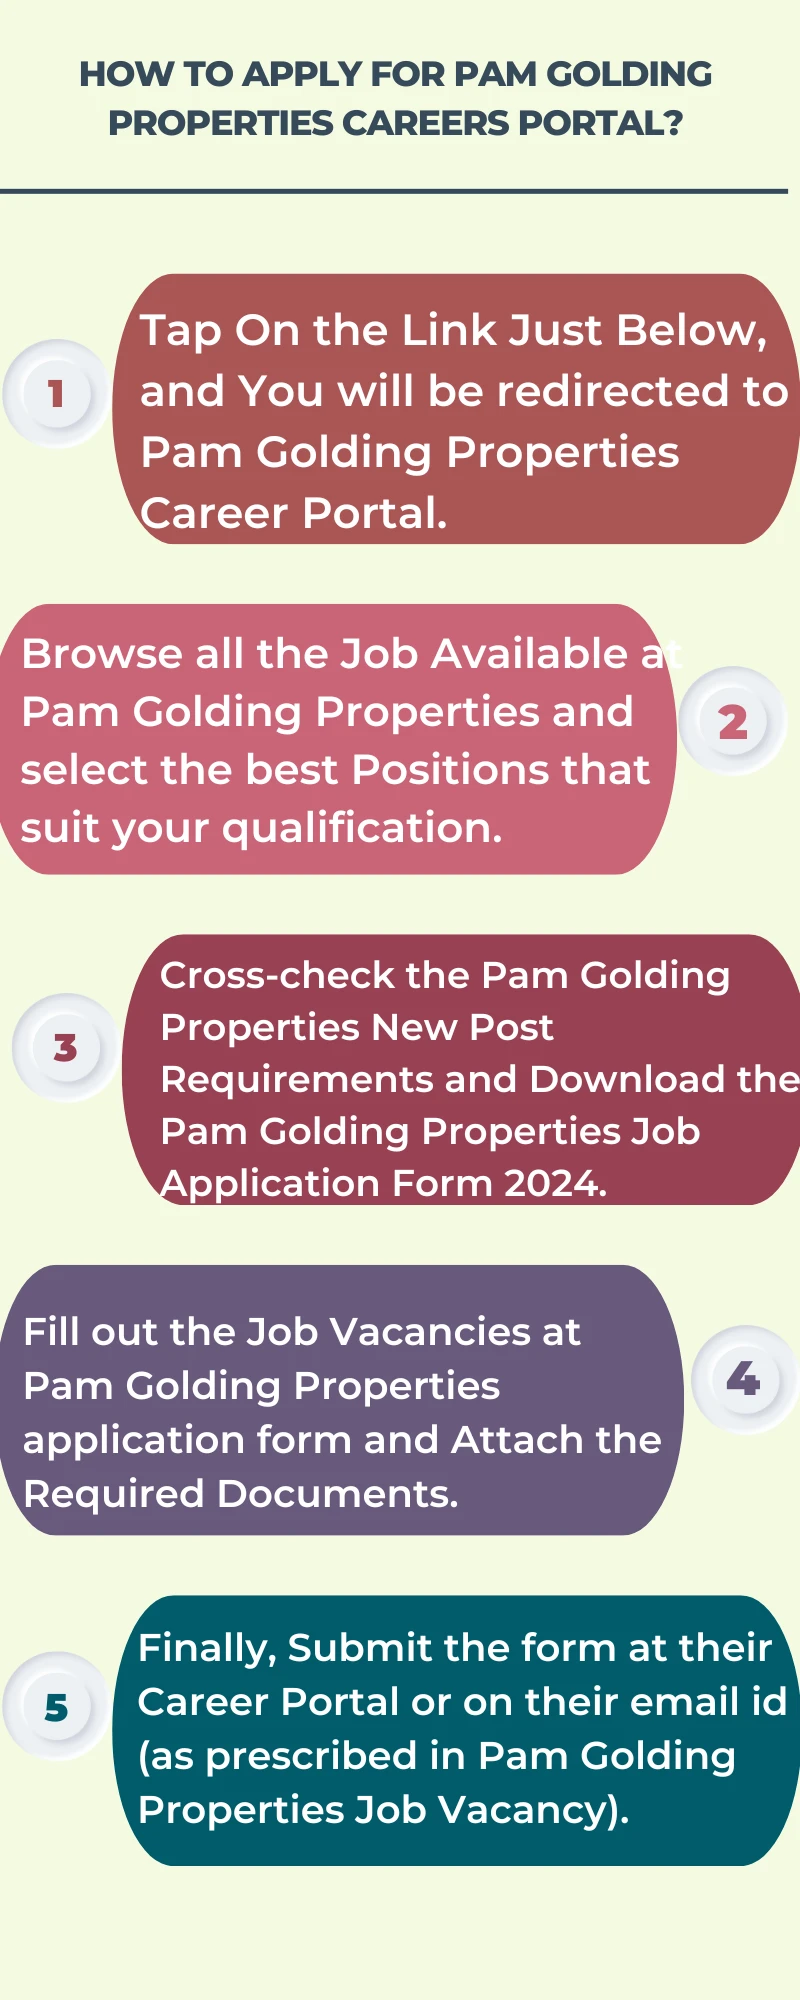 How To Apply for Pam Golding Properties Careers Portal?